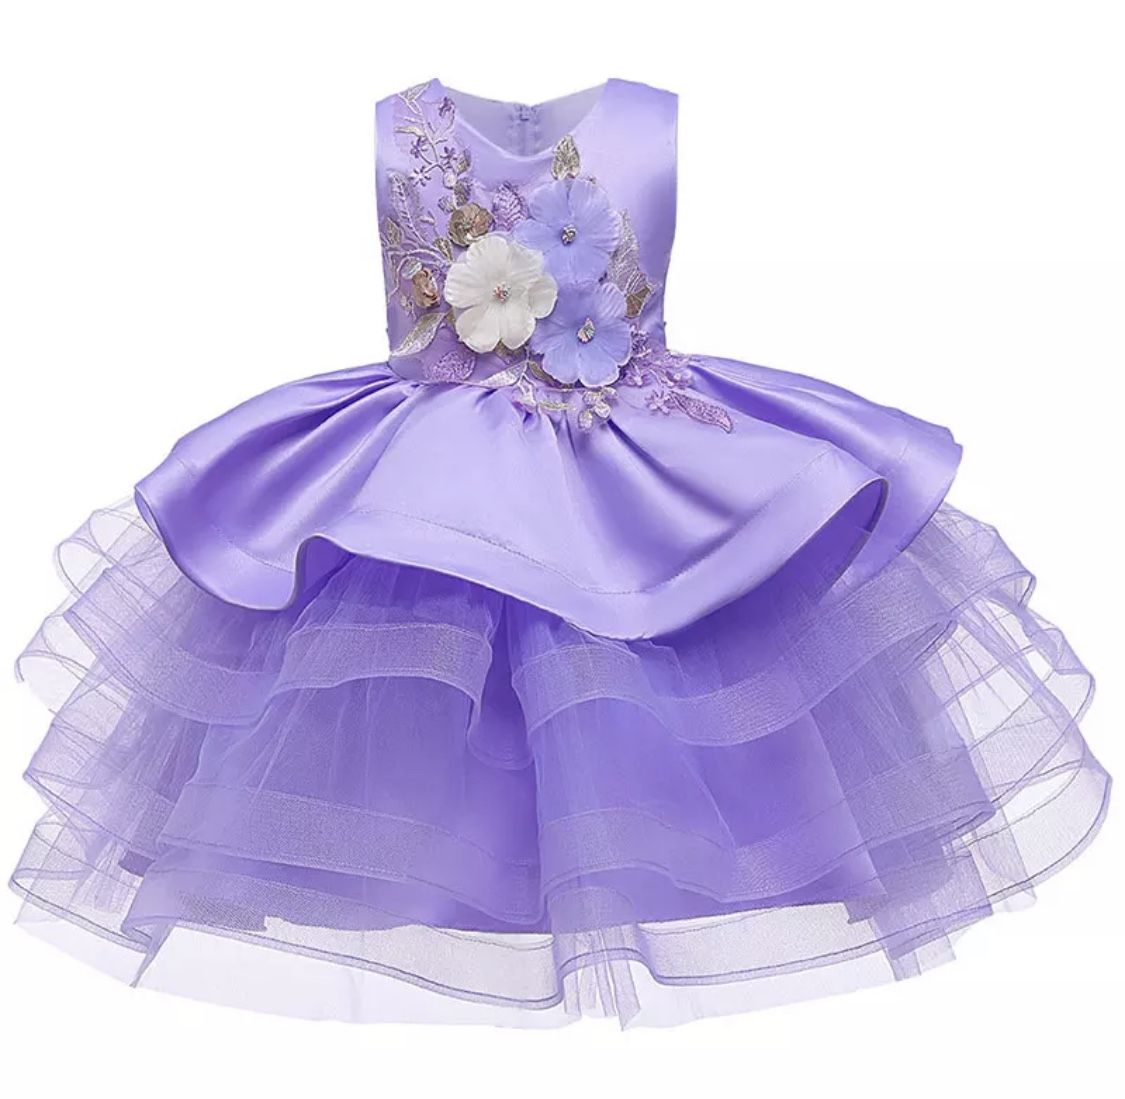 Brand New, Girls Party Tutu Dress with Flowers, size 4T 💜